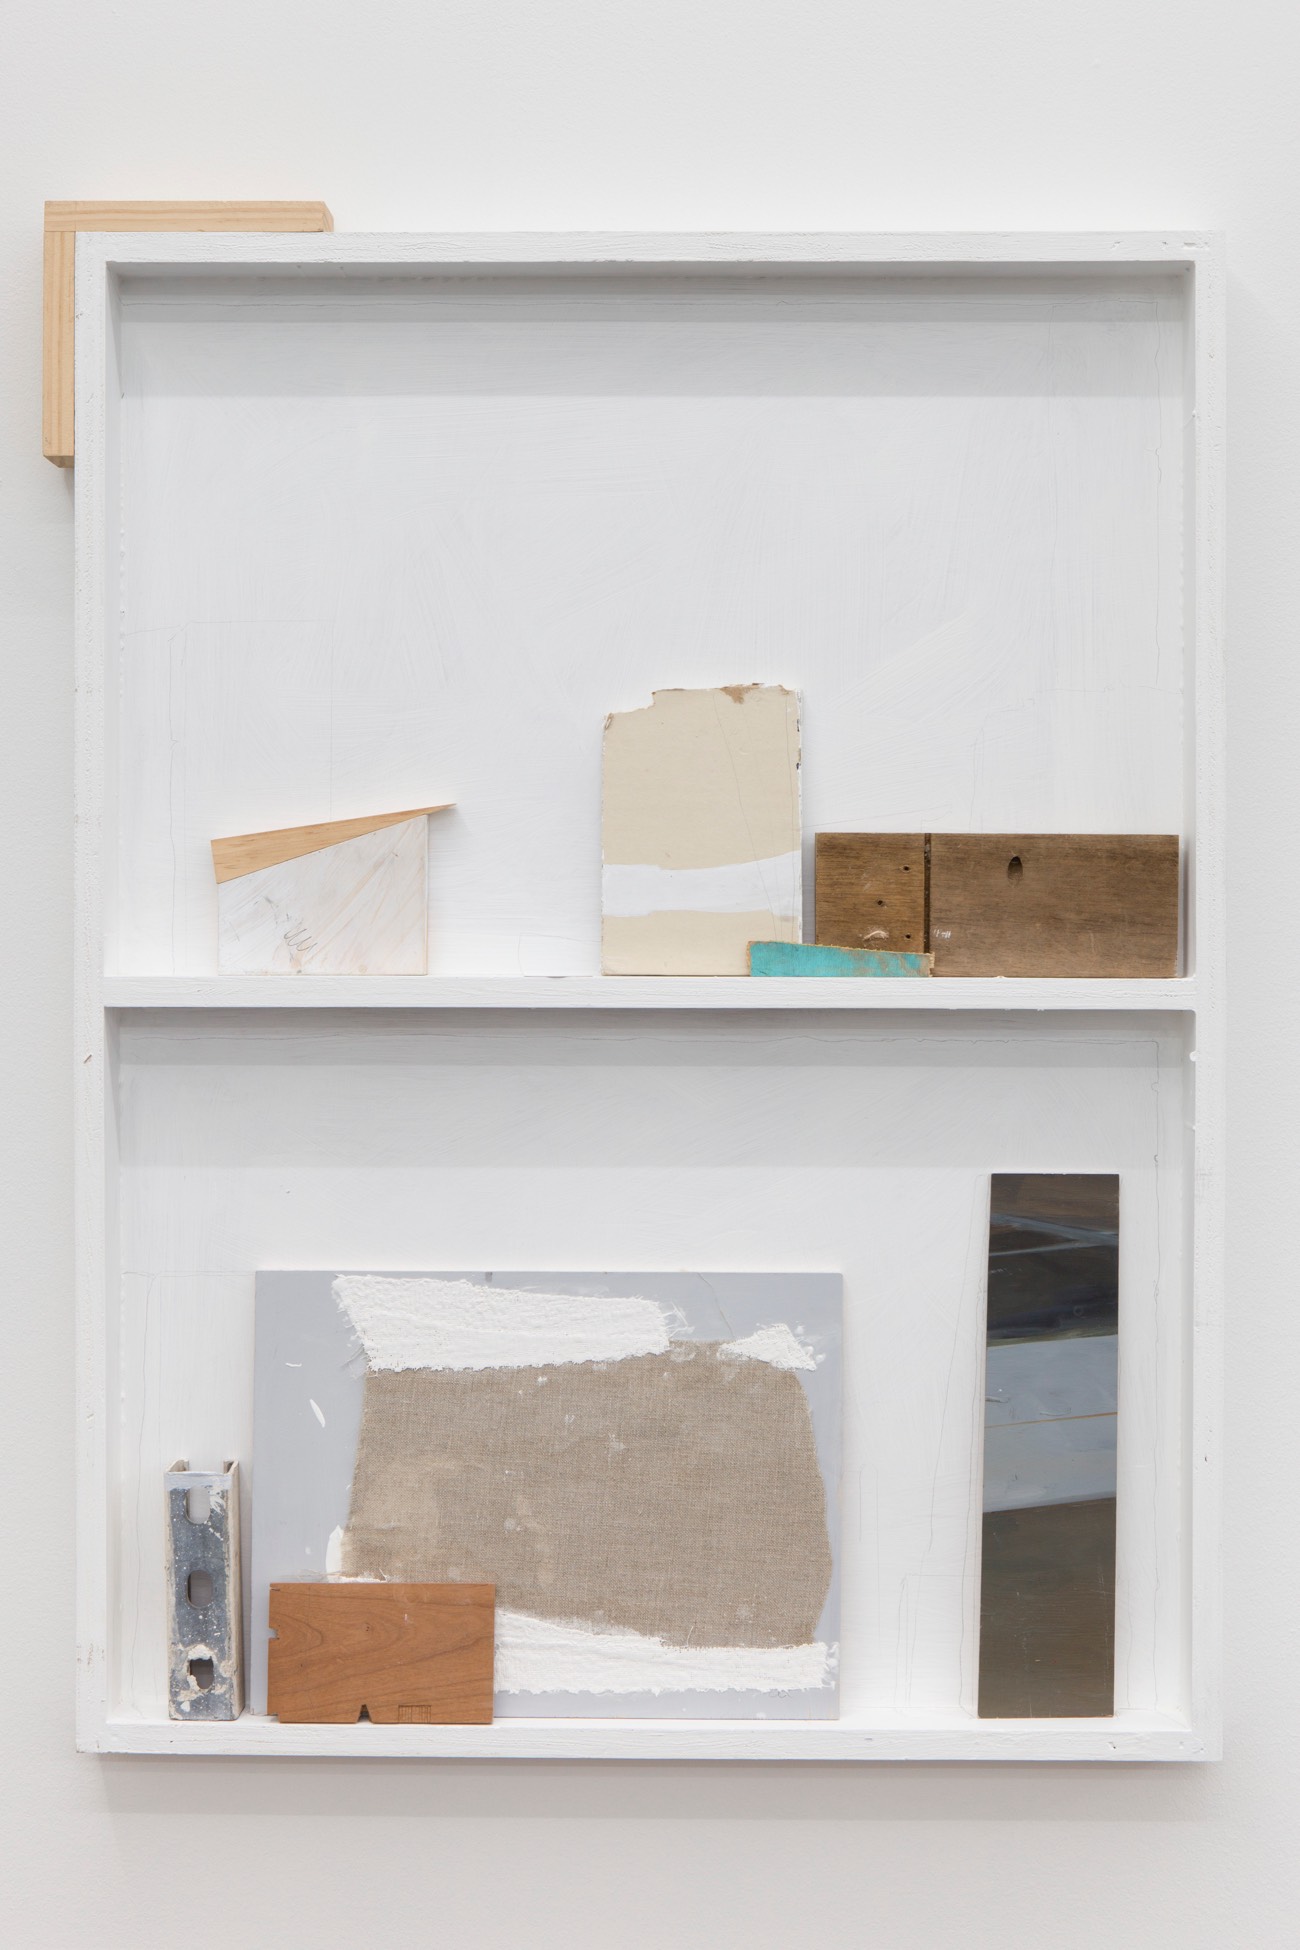 Inner 7 with plaster, linen, signed fragment and teal, 2012 - 2013